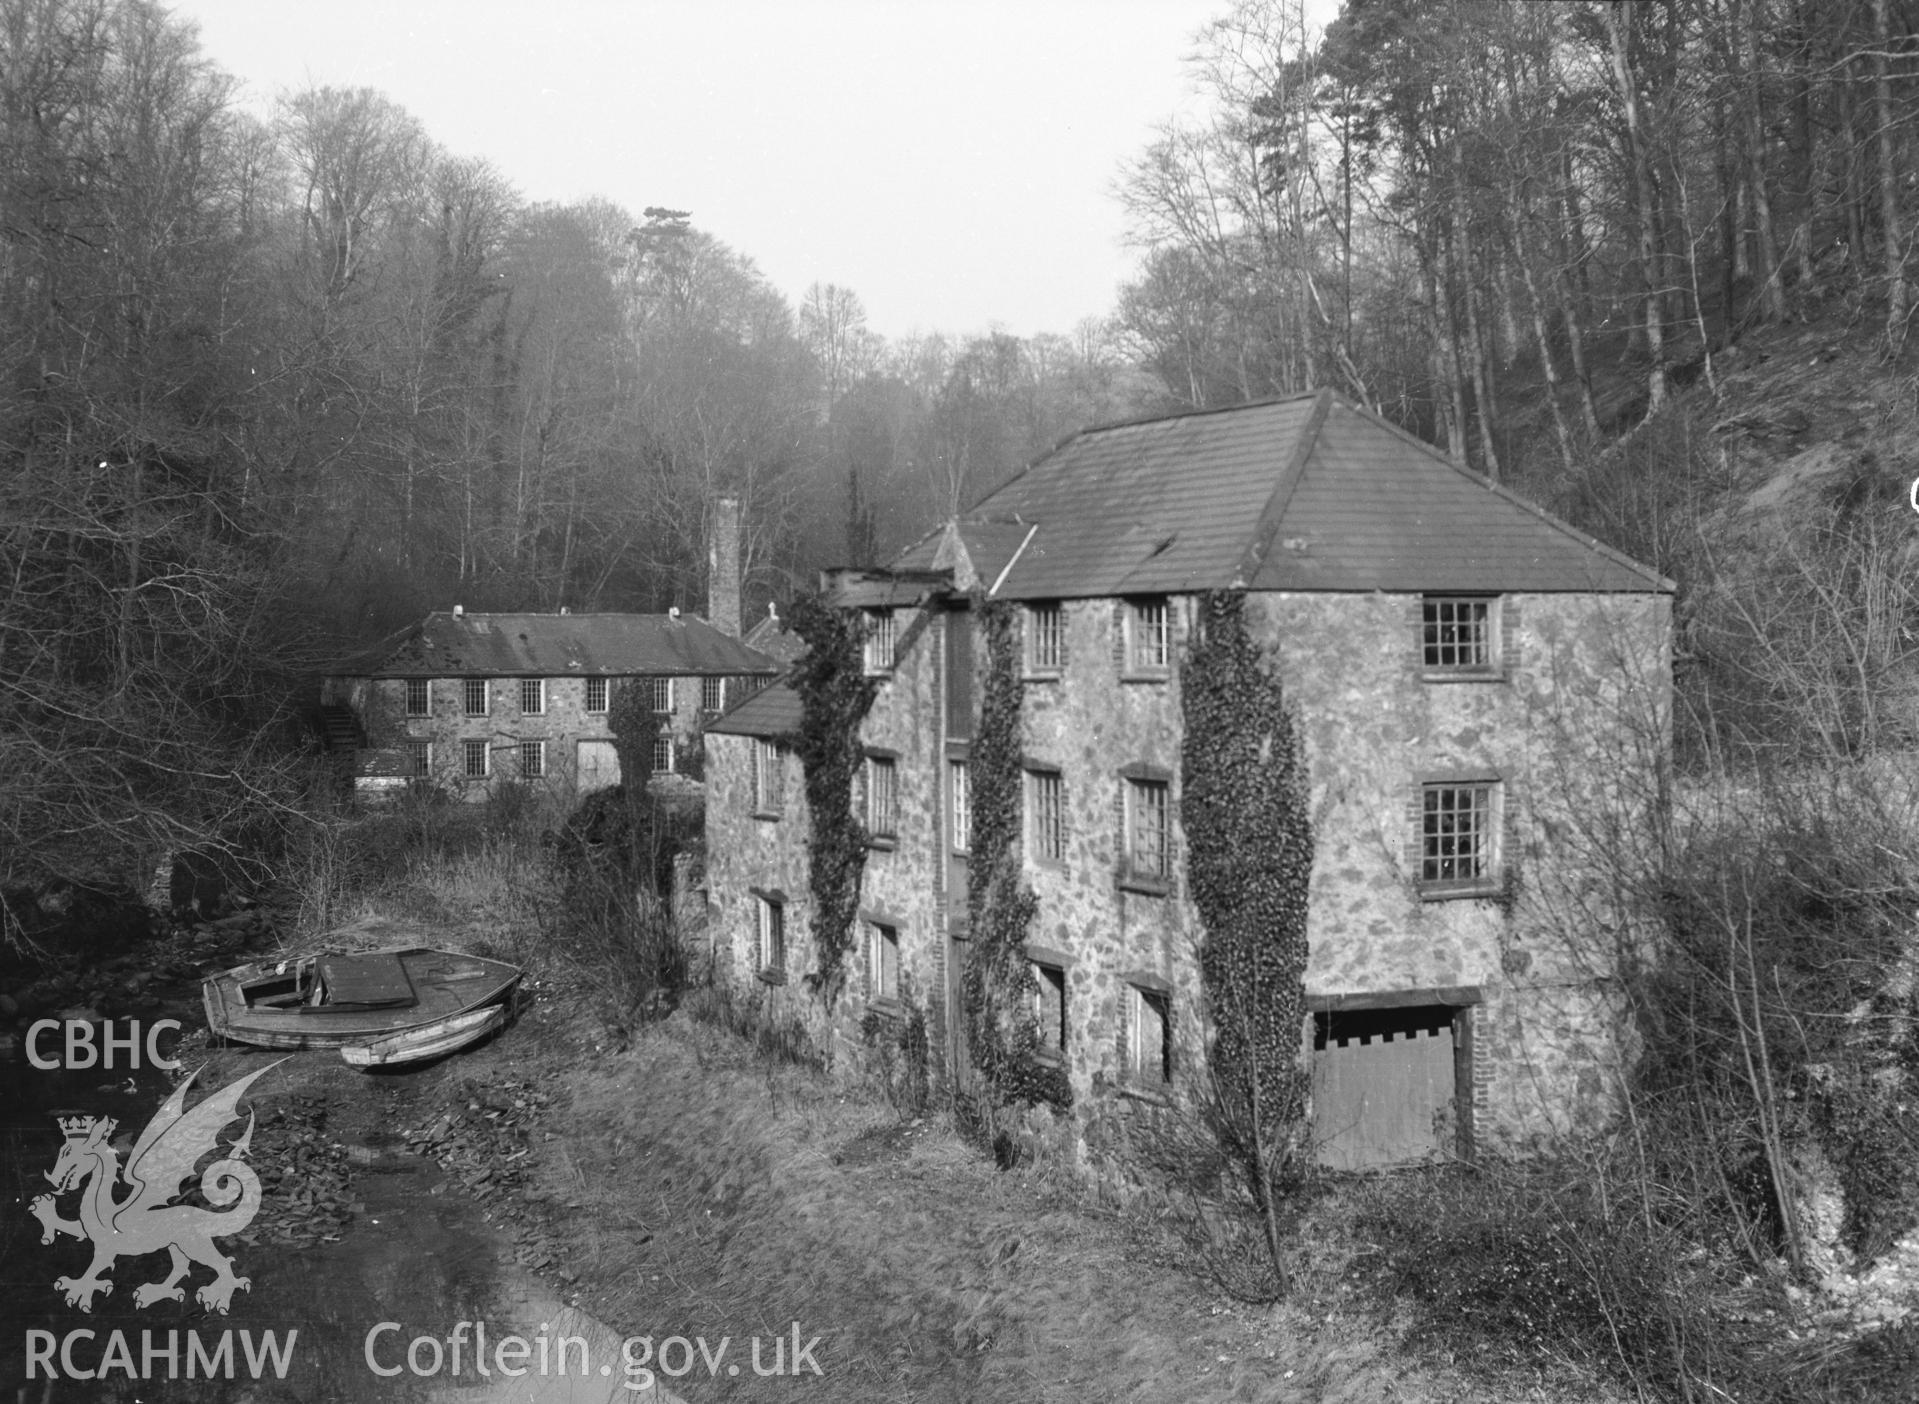 Digitised copy of a black and white negative showing Cadnant Woollen Mill, produced by RCAHMW, before 1960.